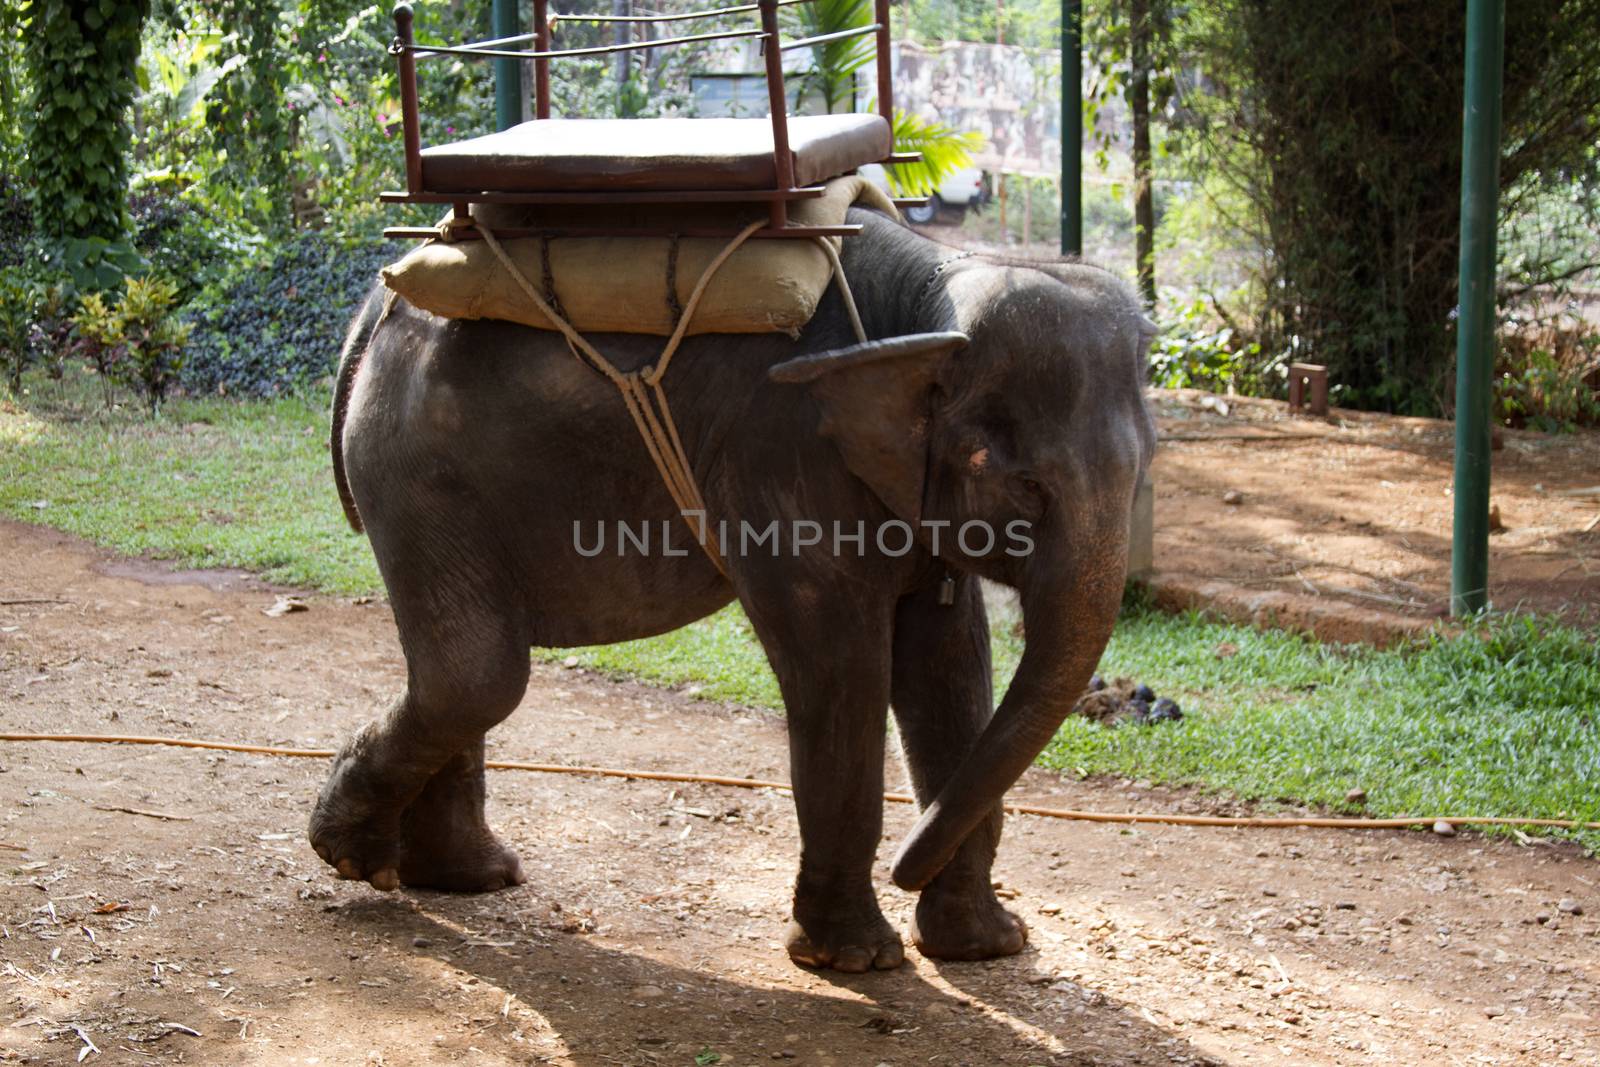 The beautiful Indian elephant with a seat for passengers costs waiting for people by mcherevan